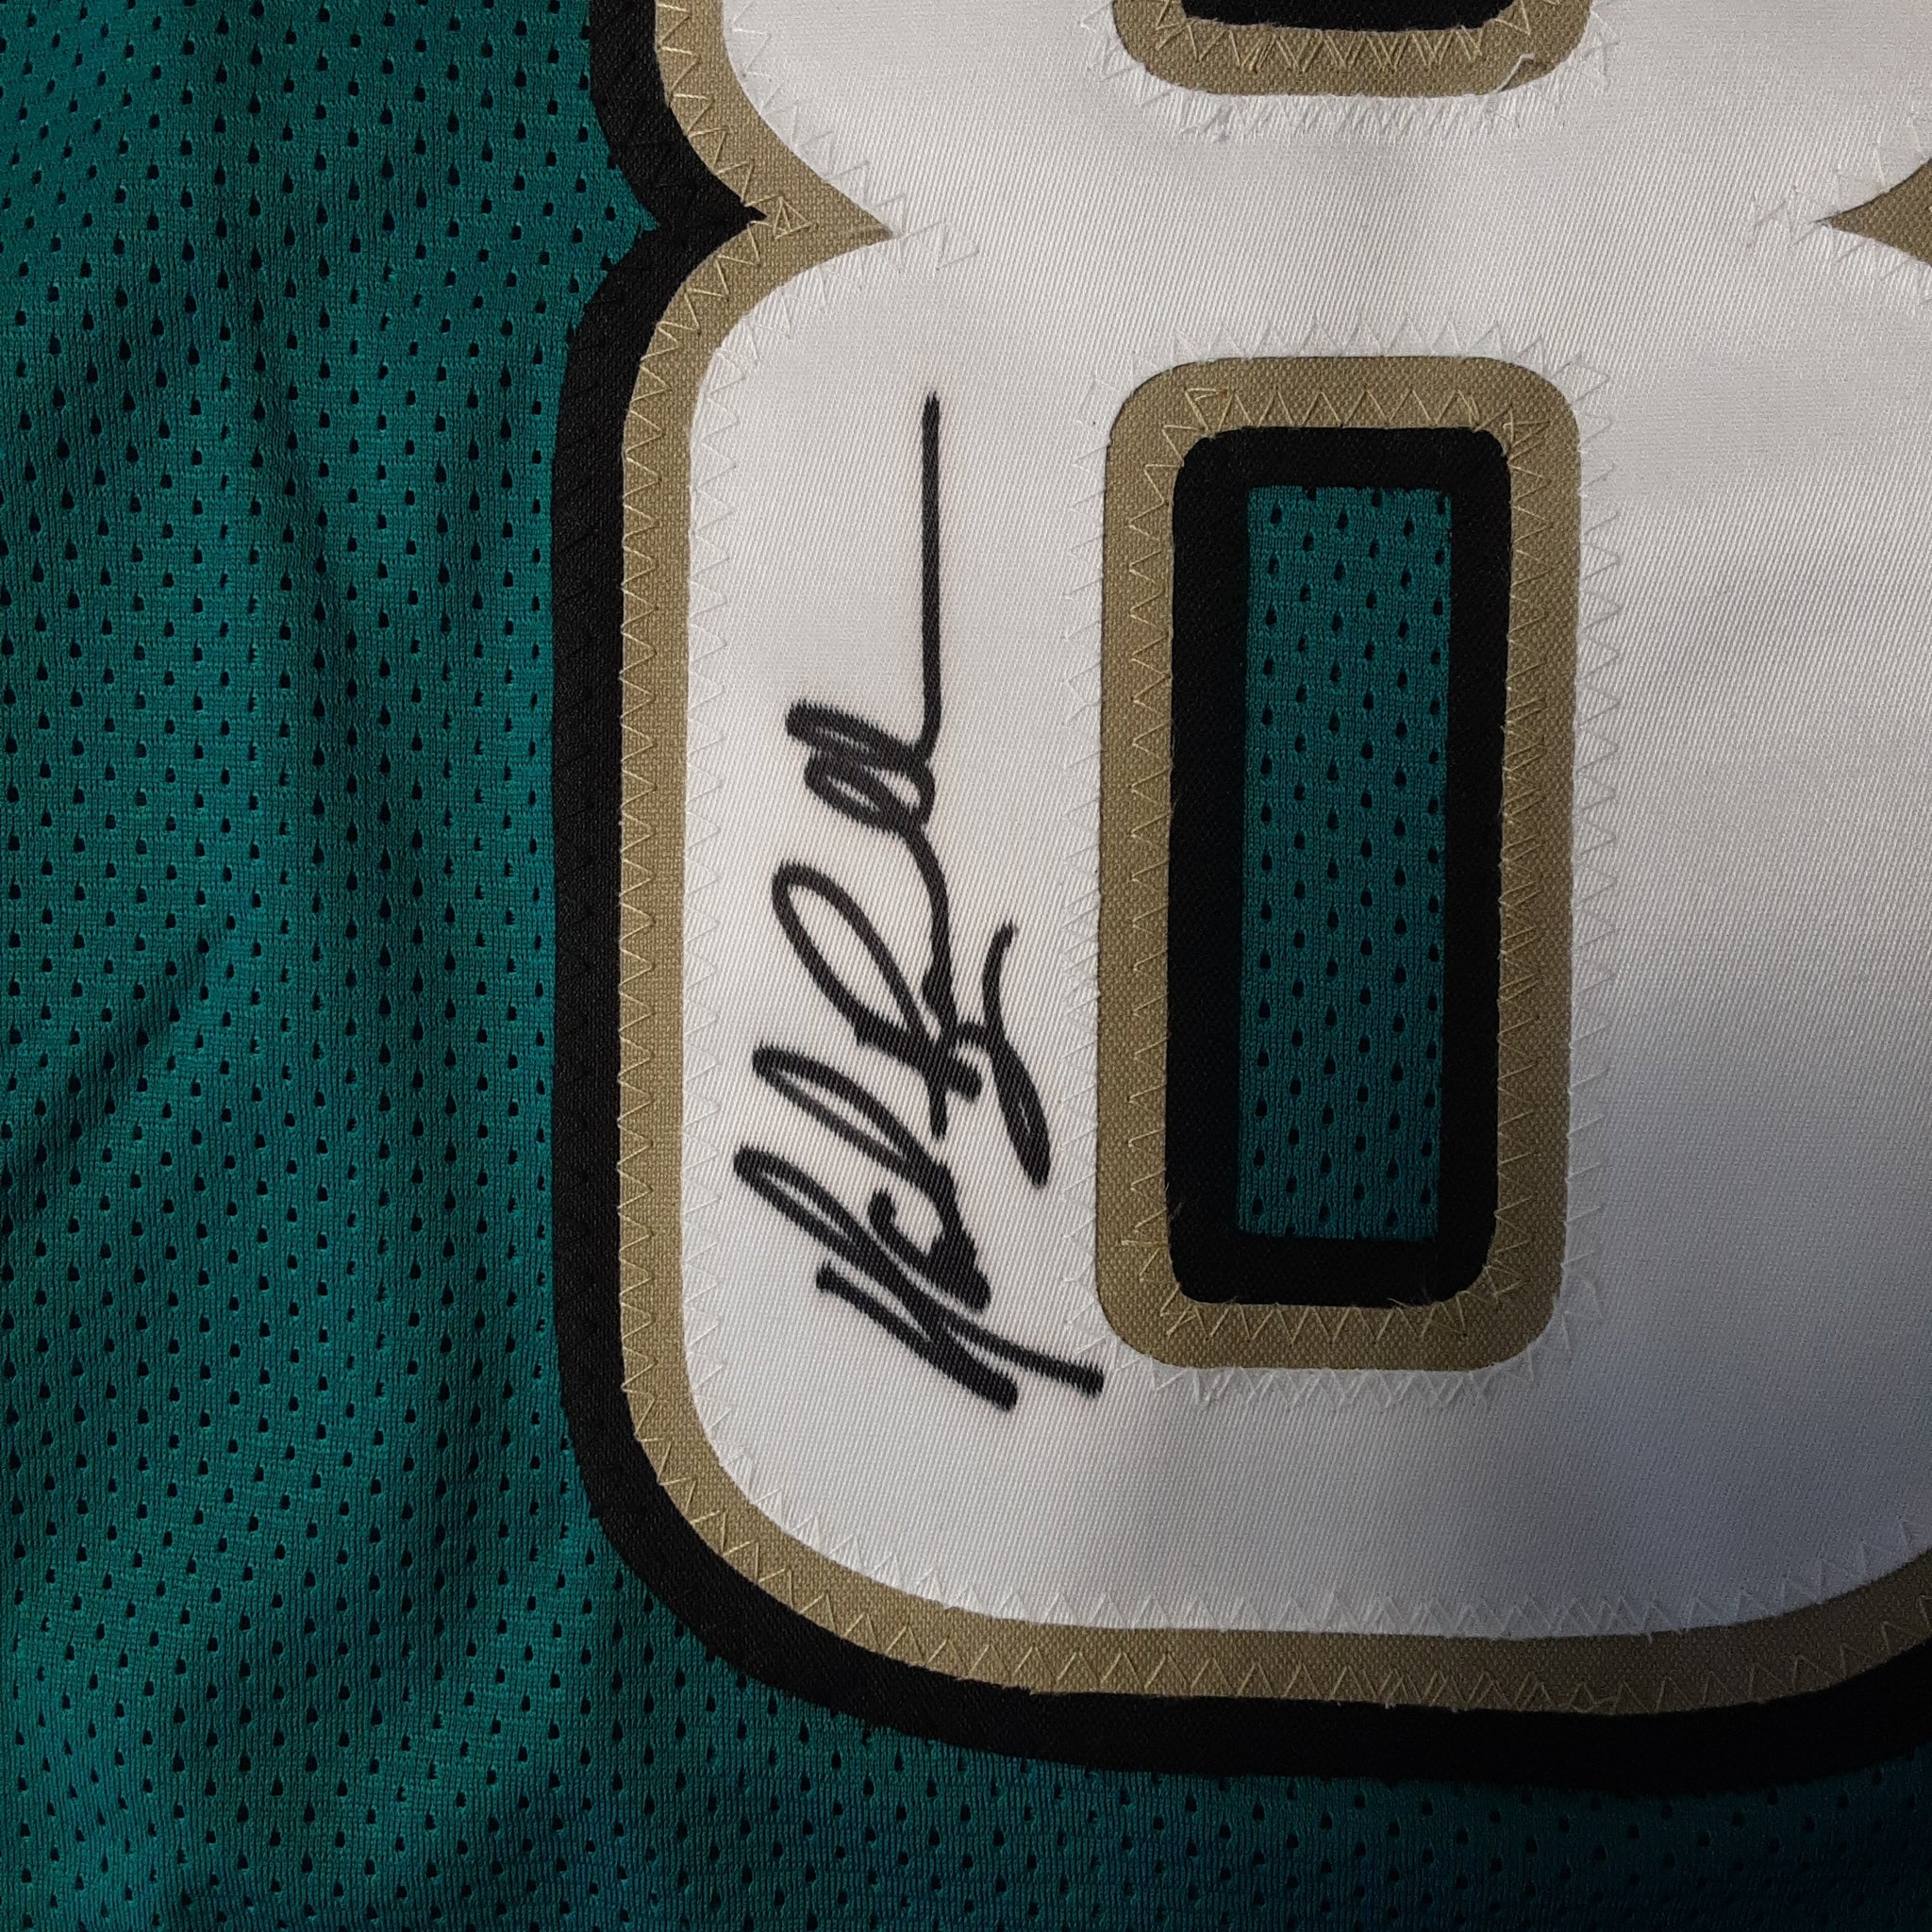 Mark Brunell Authentic Signed Pro Style Jersey Autographed JSA